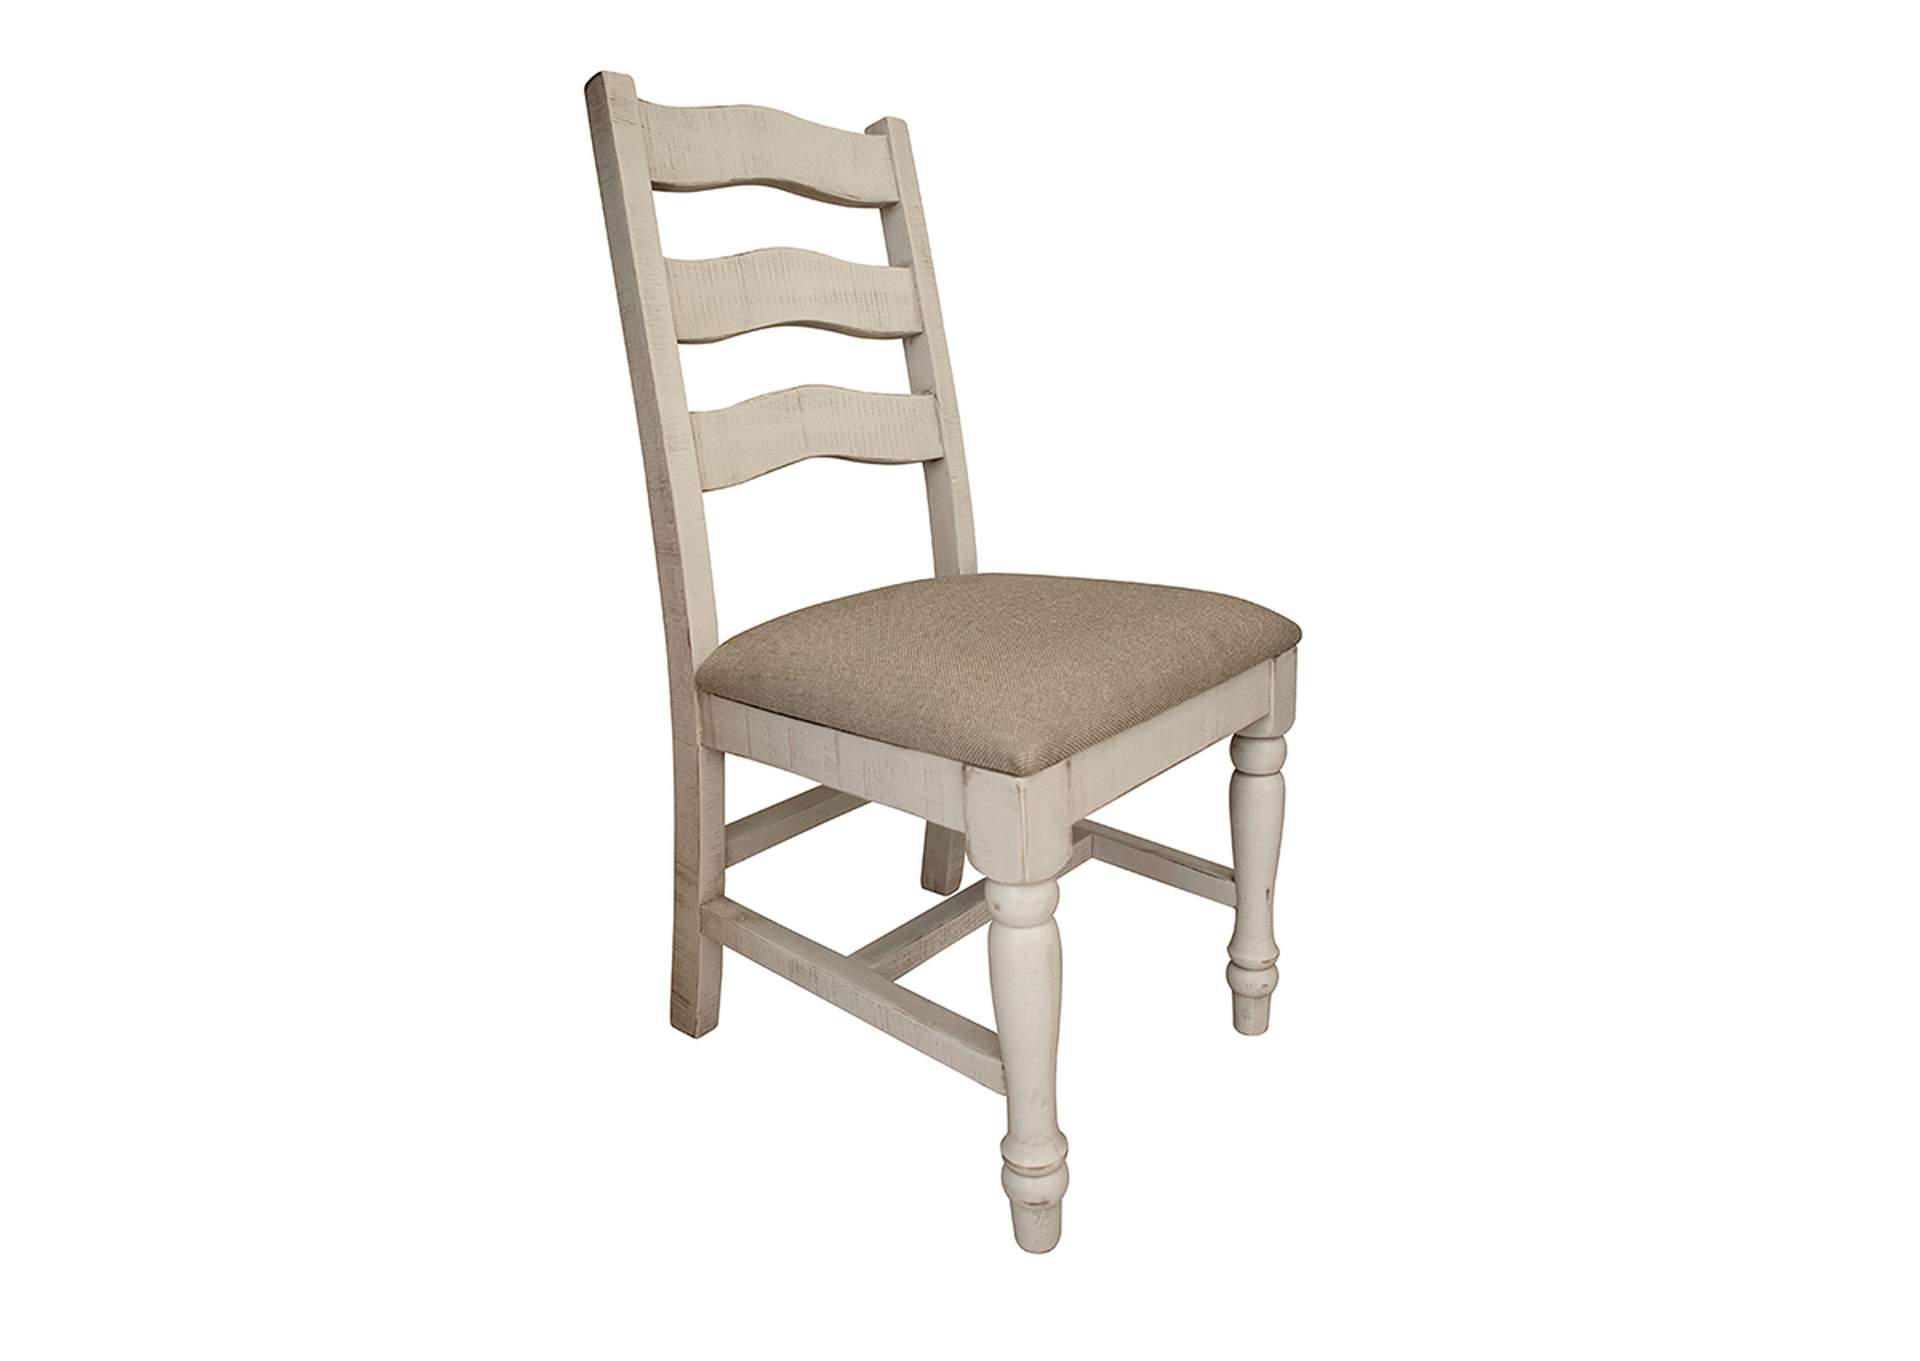 Rock Valley Solid Wood Chair w/ Fabric Seat,International Furniture Direct